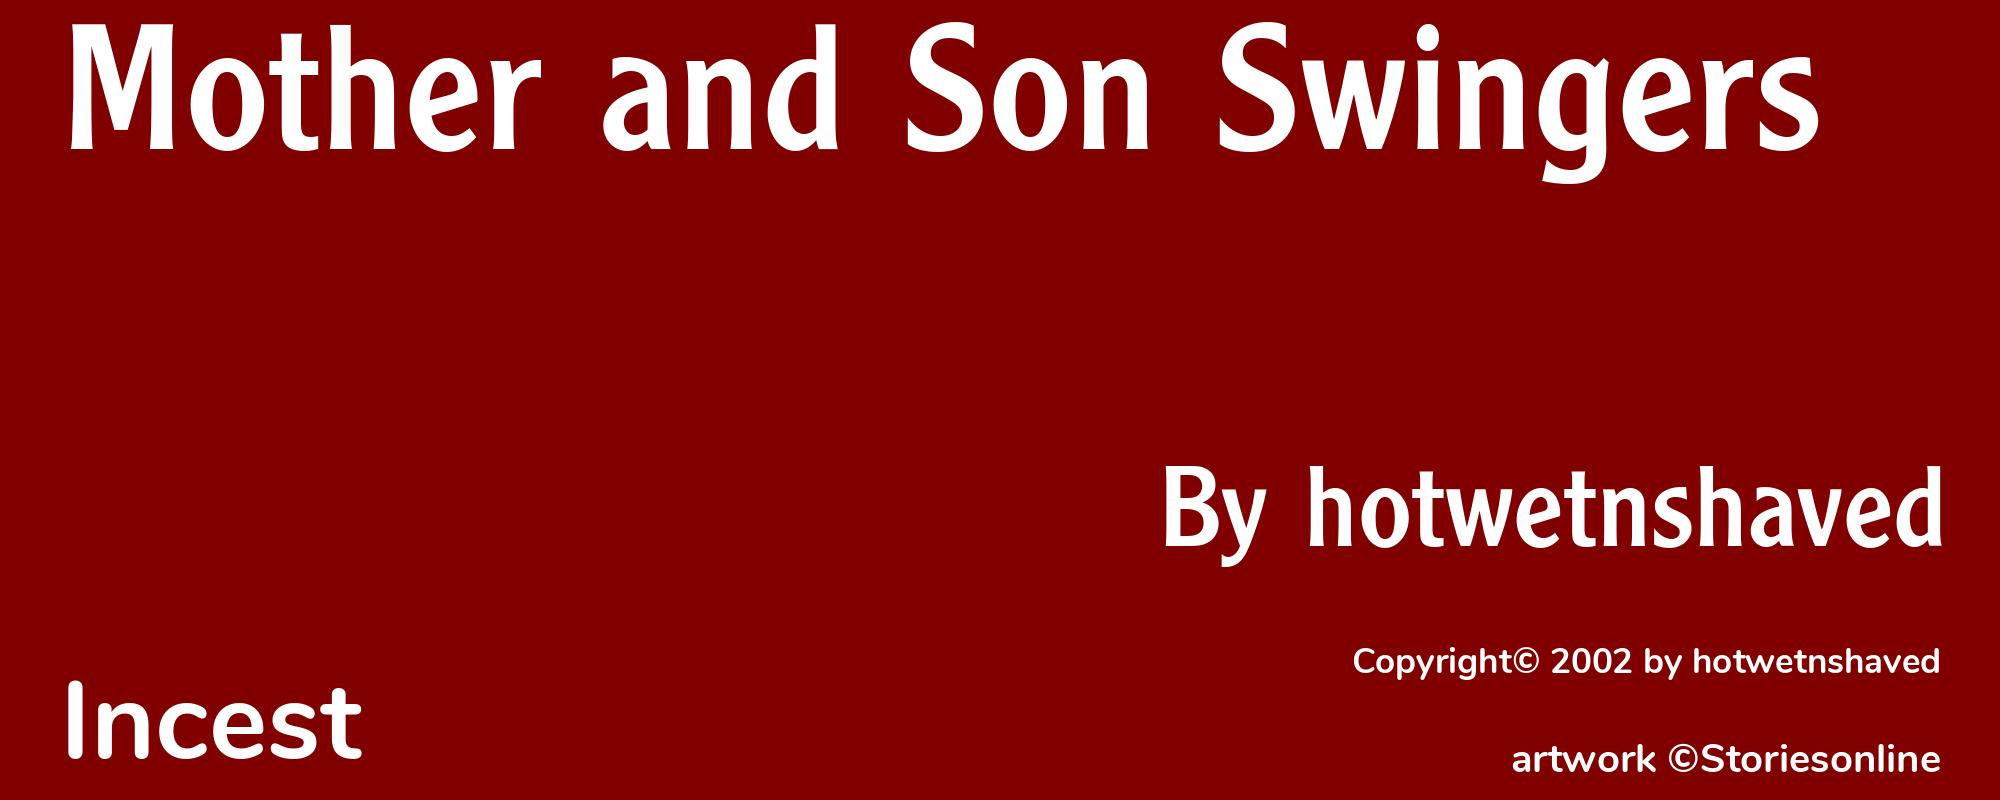 Mother and Son Swingers - Cover